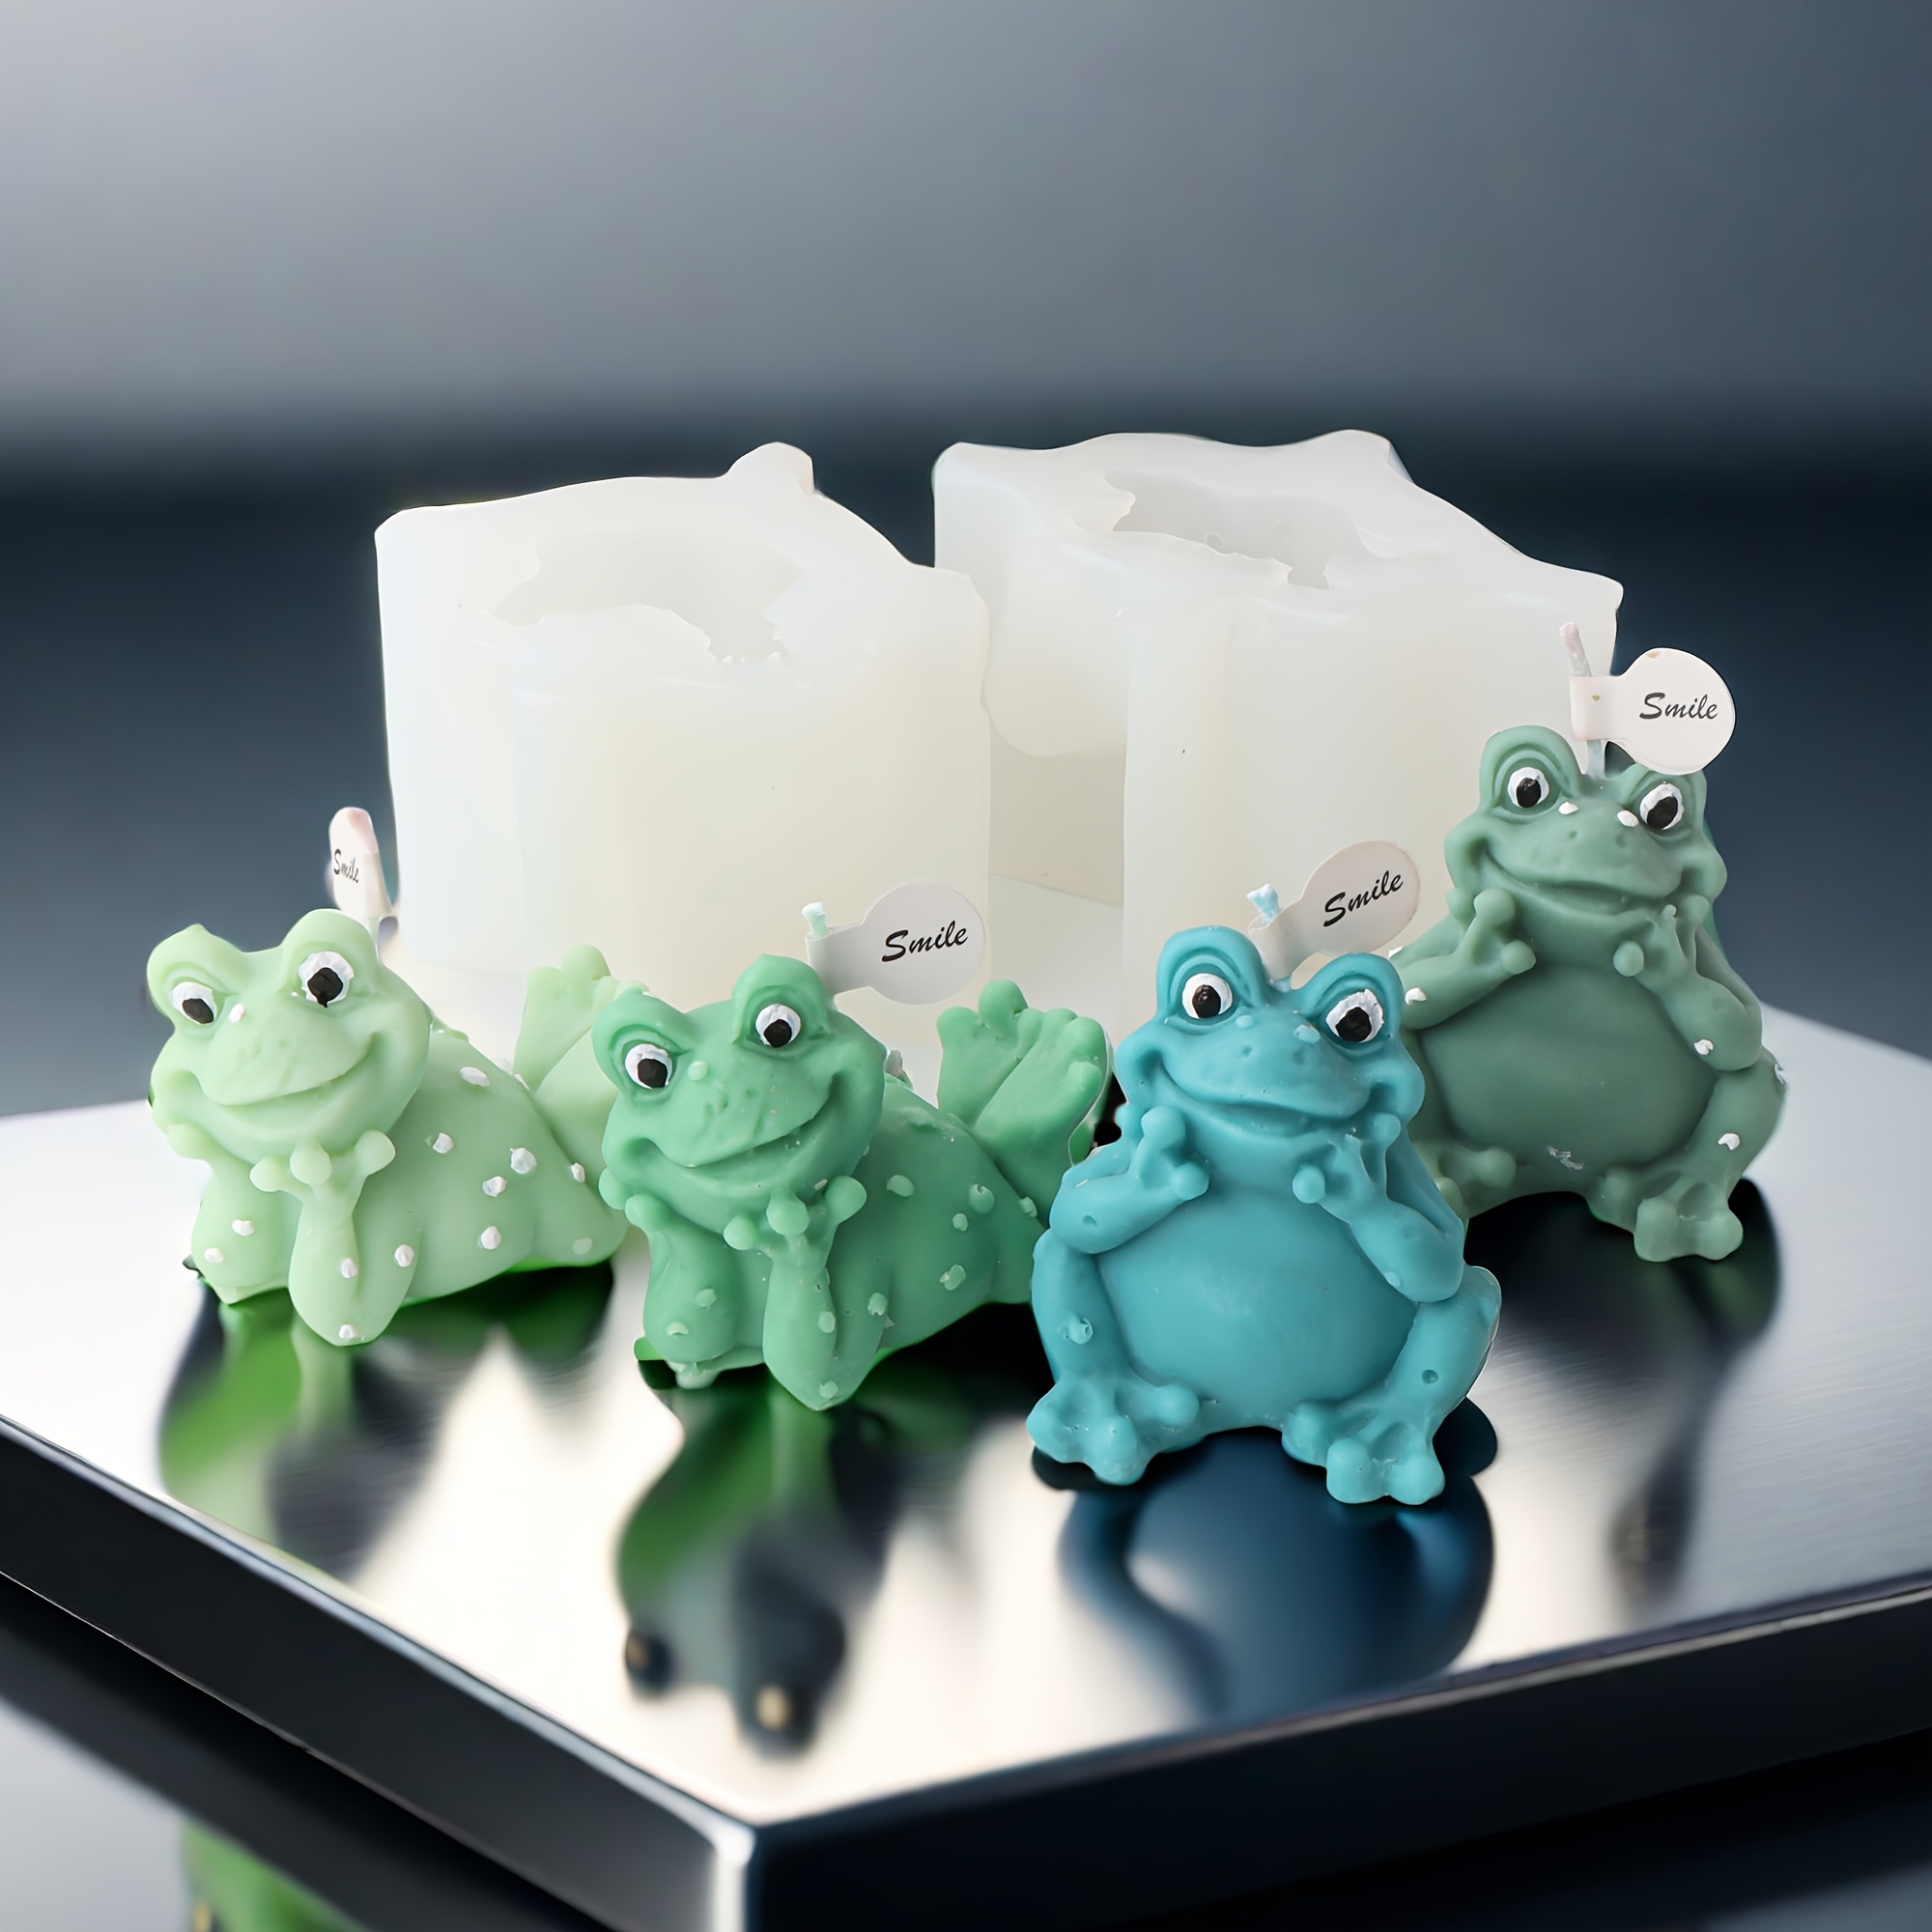 

Flexible 3d Frog Silicone Mold For Candles, Wax, Clay & Resin Crafts - Food-grade, Reusable Diy Animal Scented Plaster Casting Tool